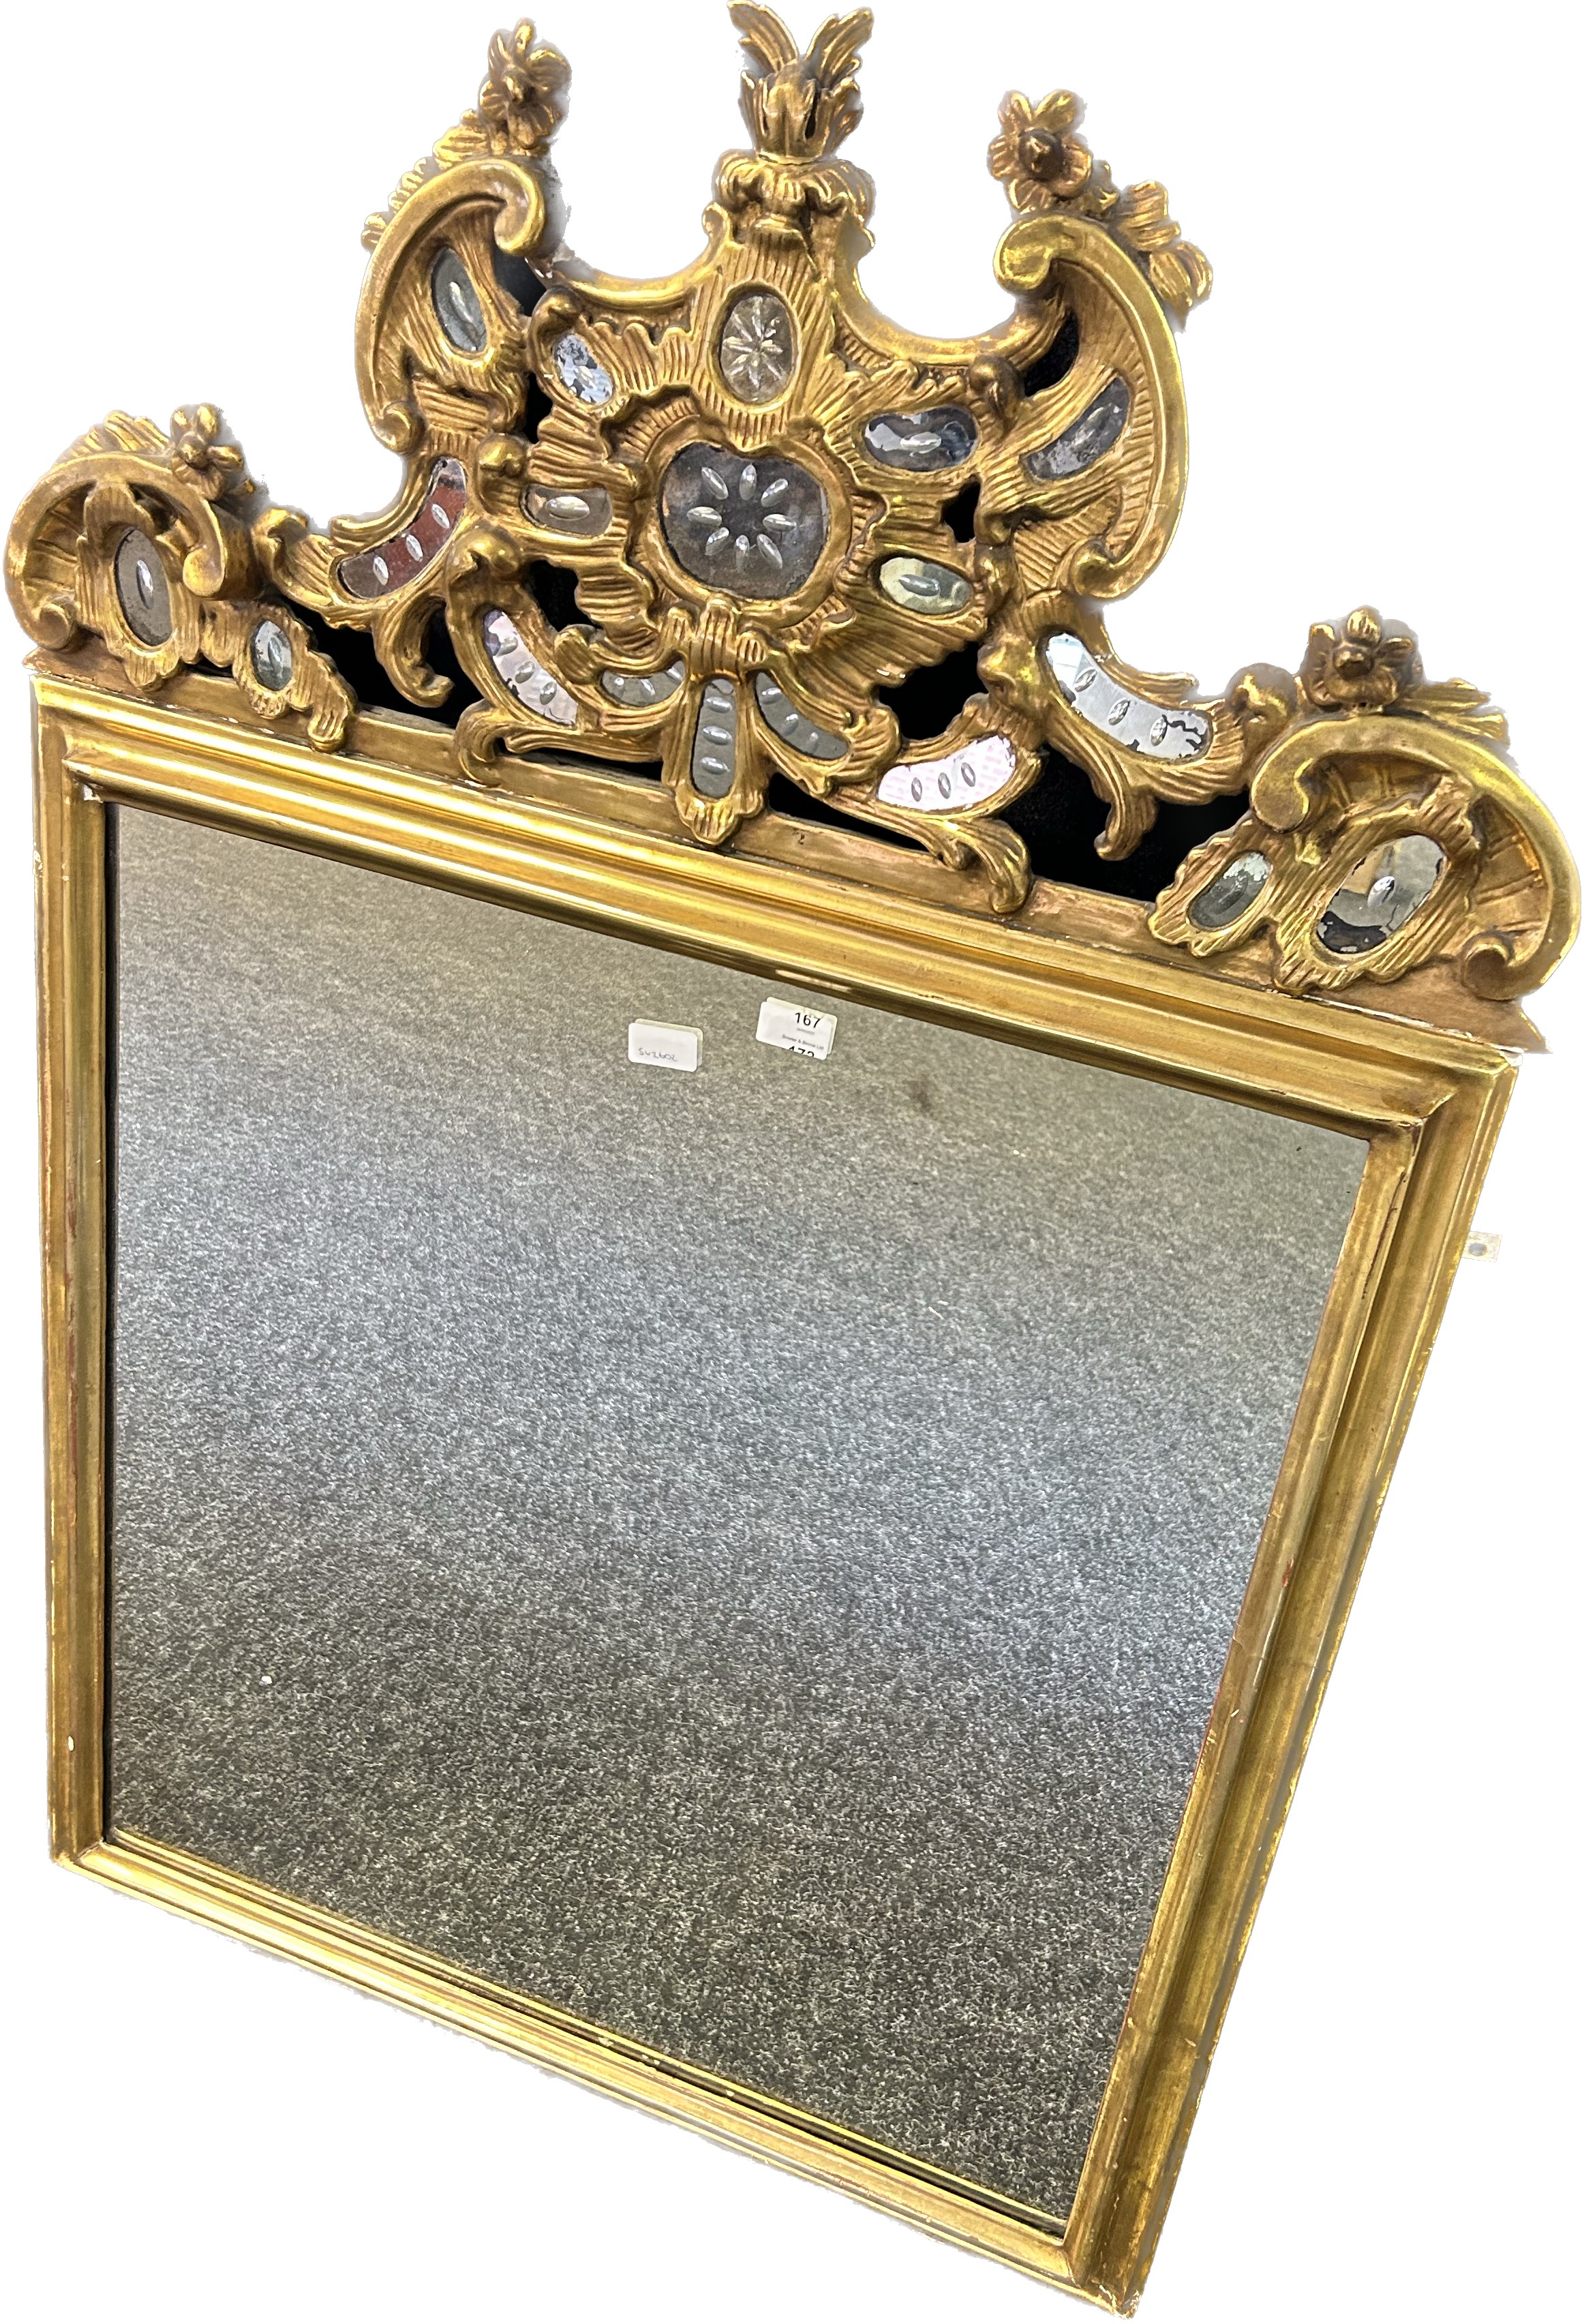 Antique gilt painted mirror, surmounted by scroll and foliate moulding with mirror detail [125x81cm] - Image 2 of 7